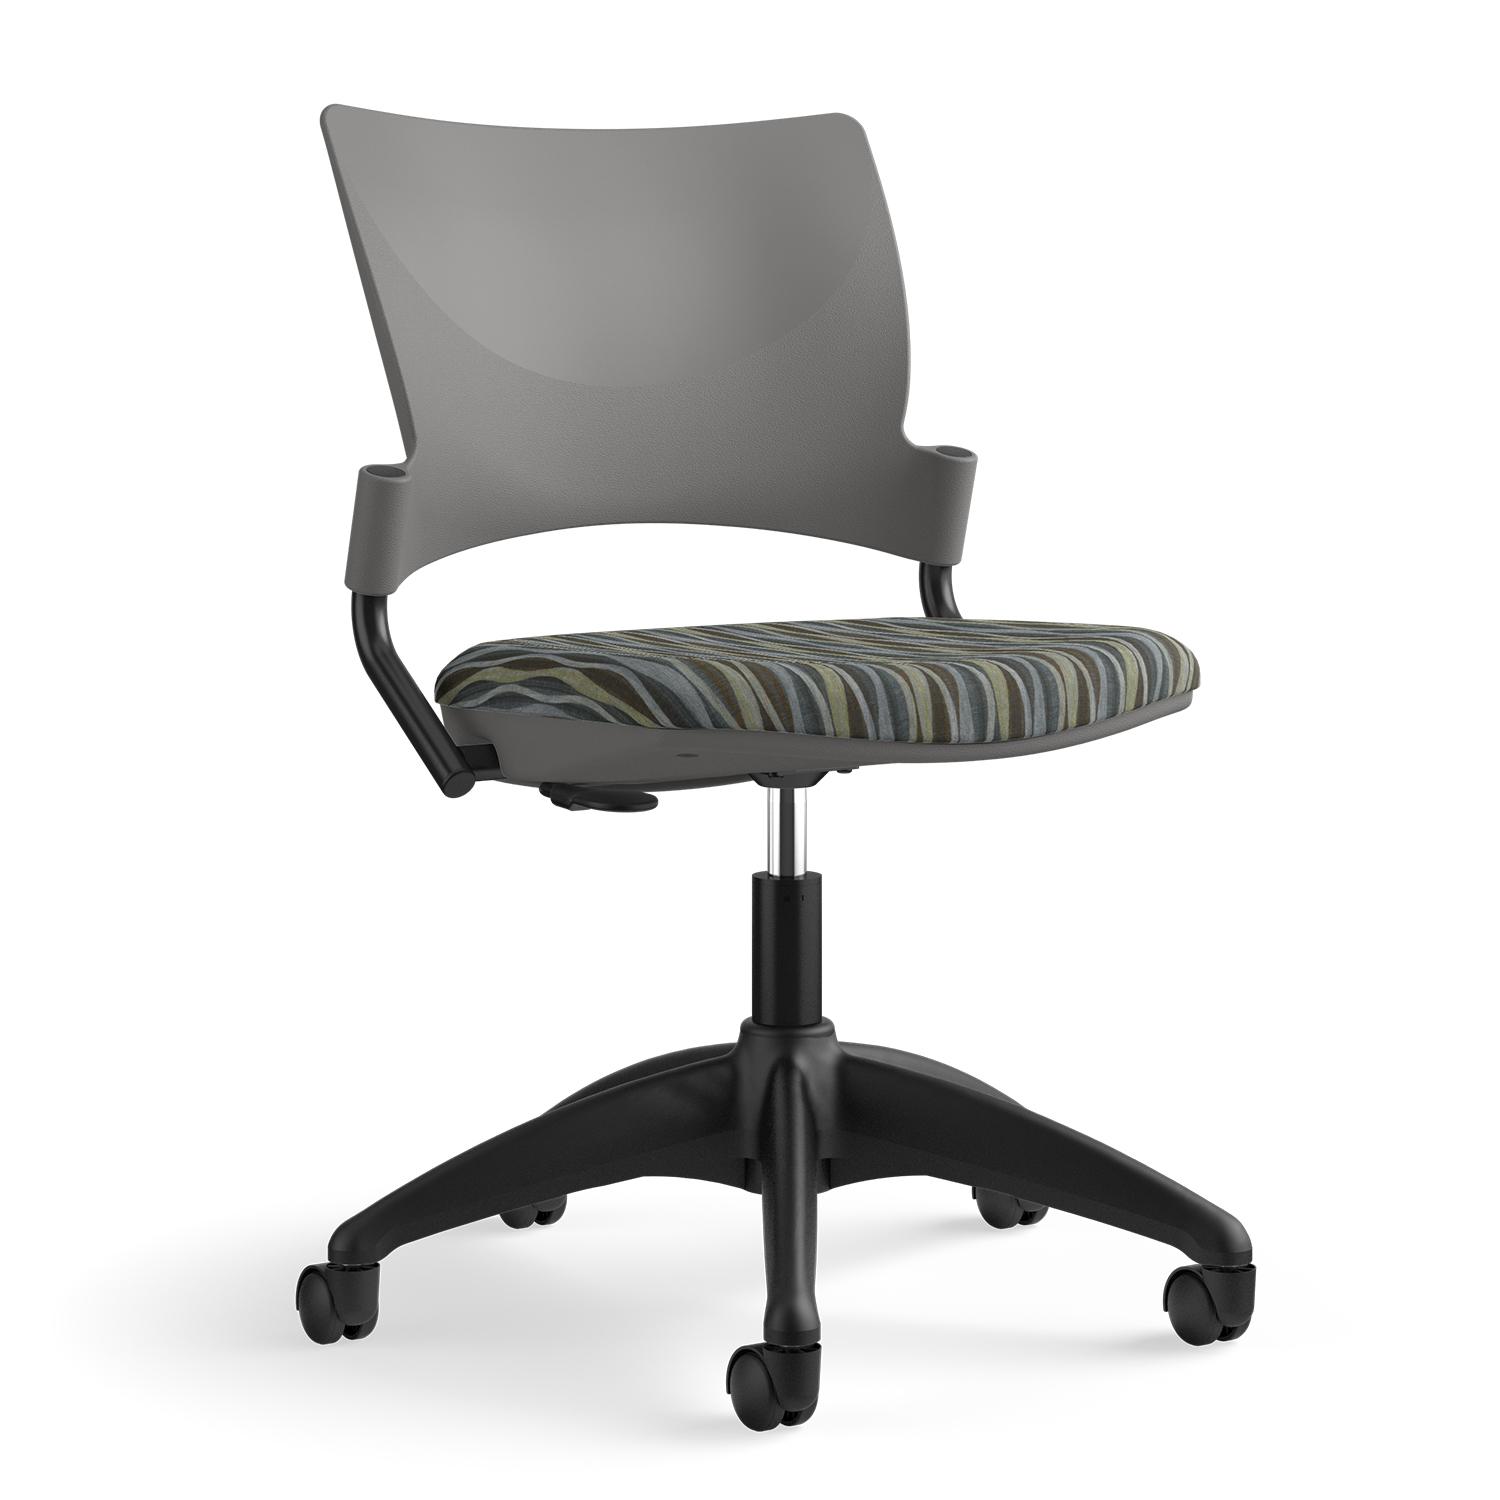 SitOnIt Relay Light Task Chair